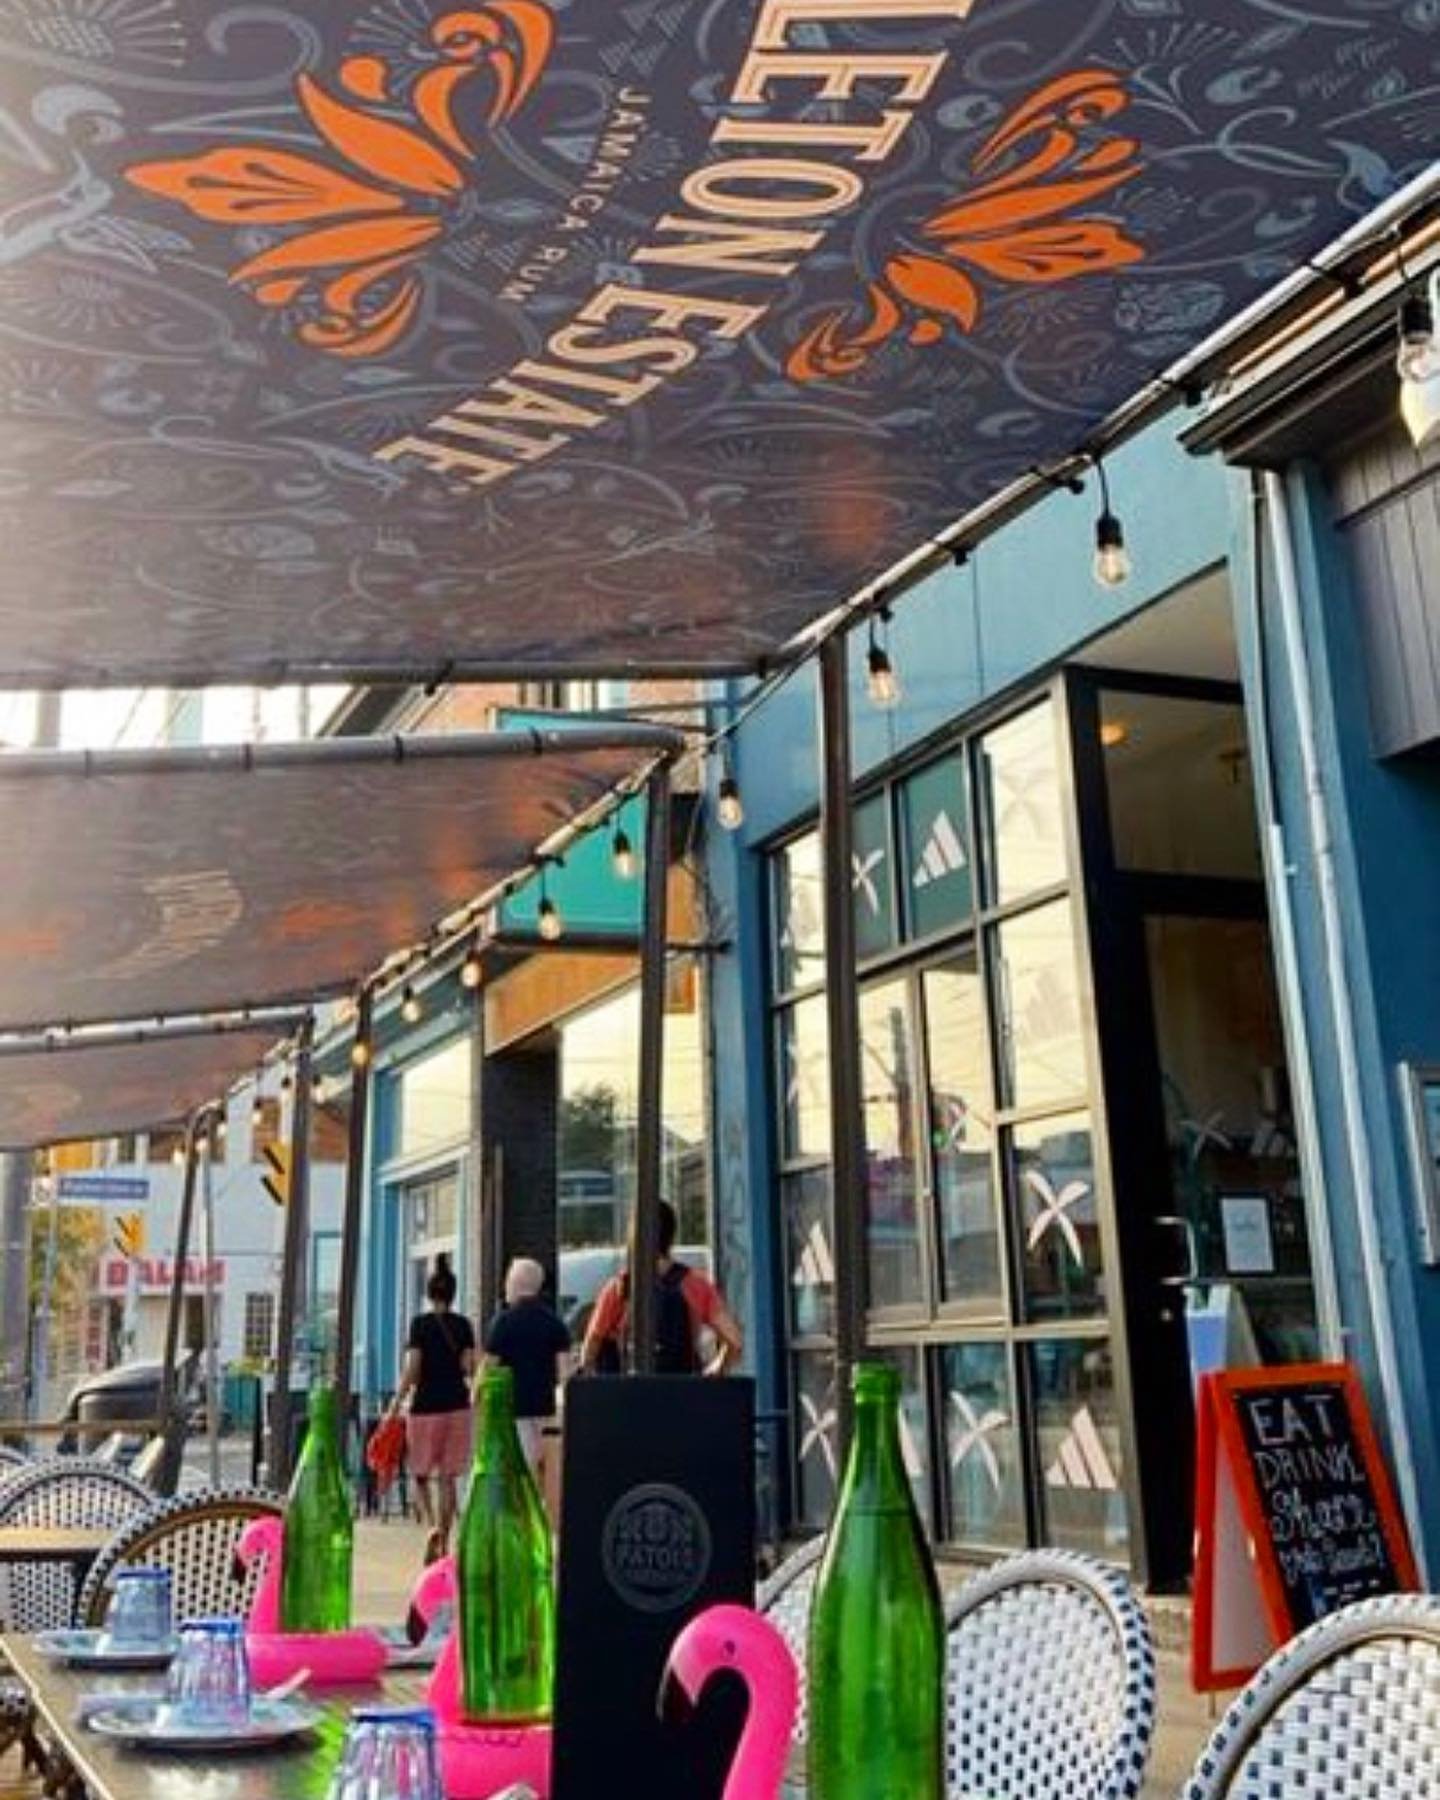 It&rsquo;s a holiday weekend and the vibes are GOOD! Patio SZN is back. 

Let&rsquo;s PARTY 🎉 

#patioszn #patio #patoistoronto #patoissummer #juicyjerk